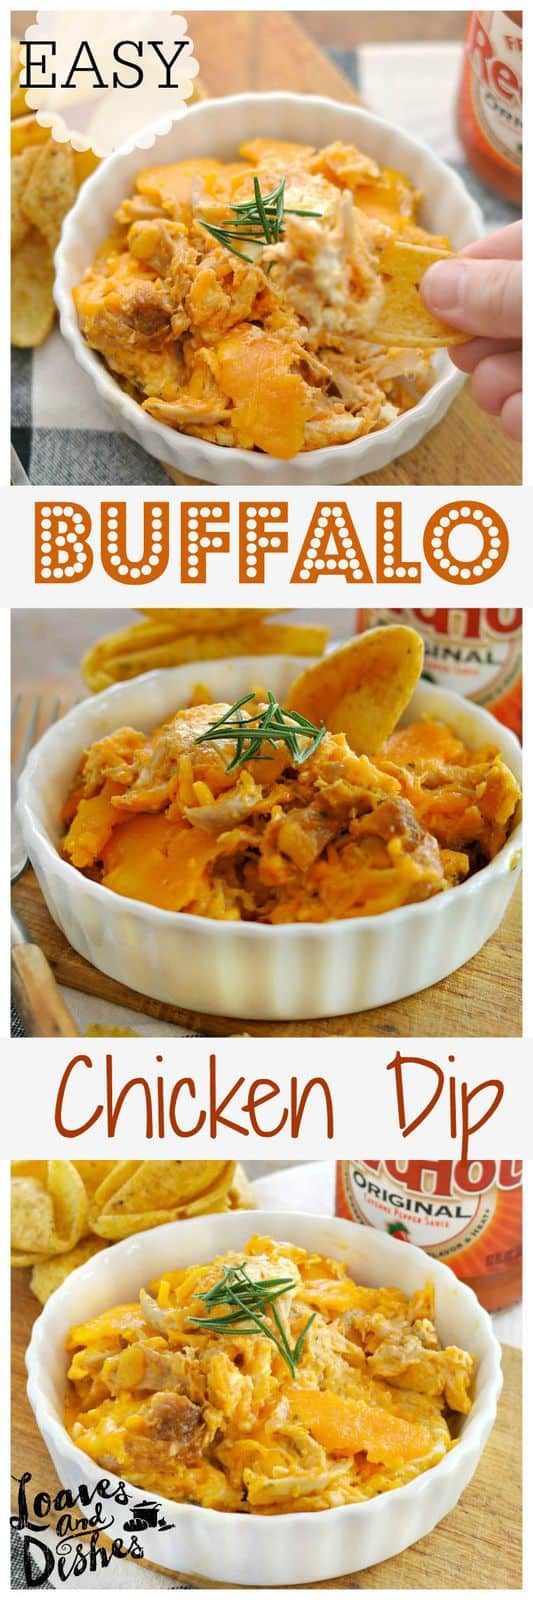 Buffalo Chicken Dip • Loaves and Dishes